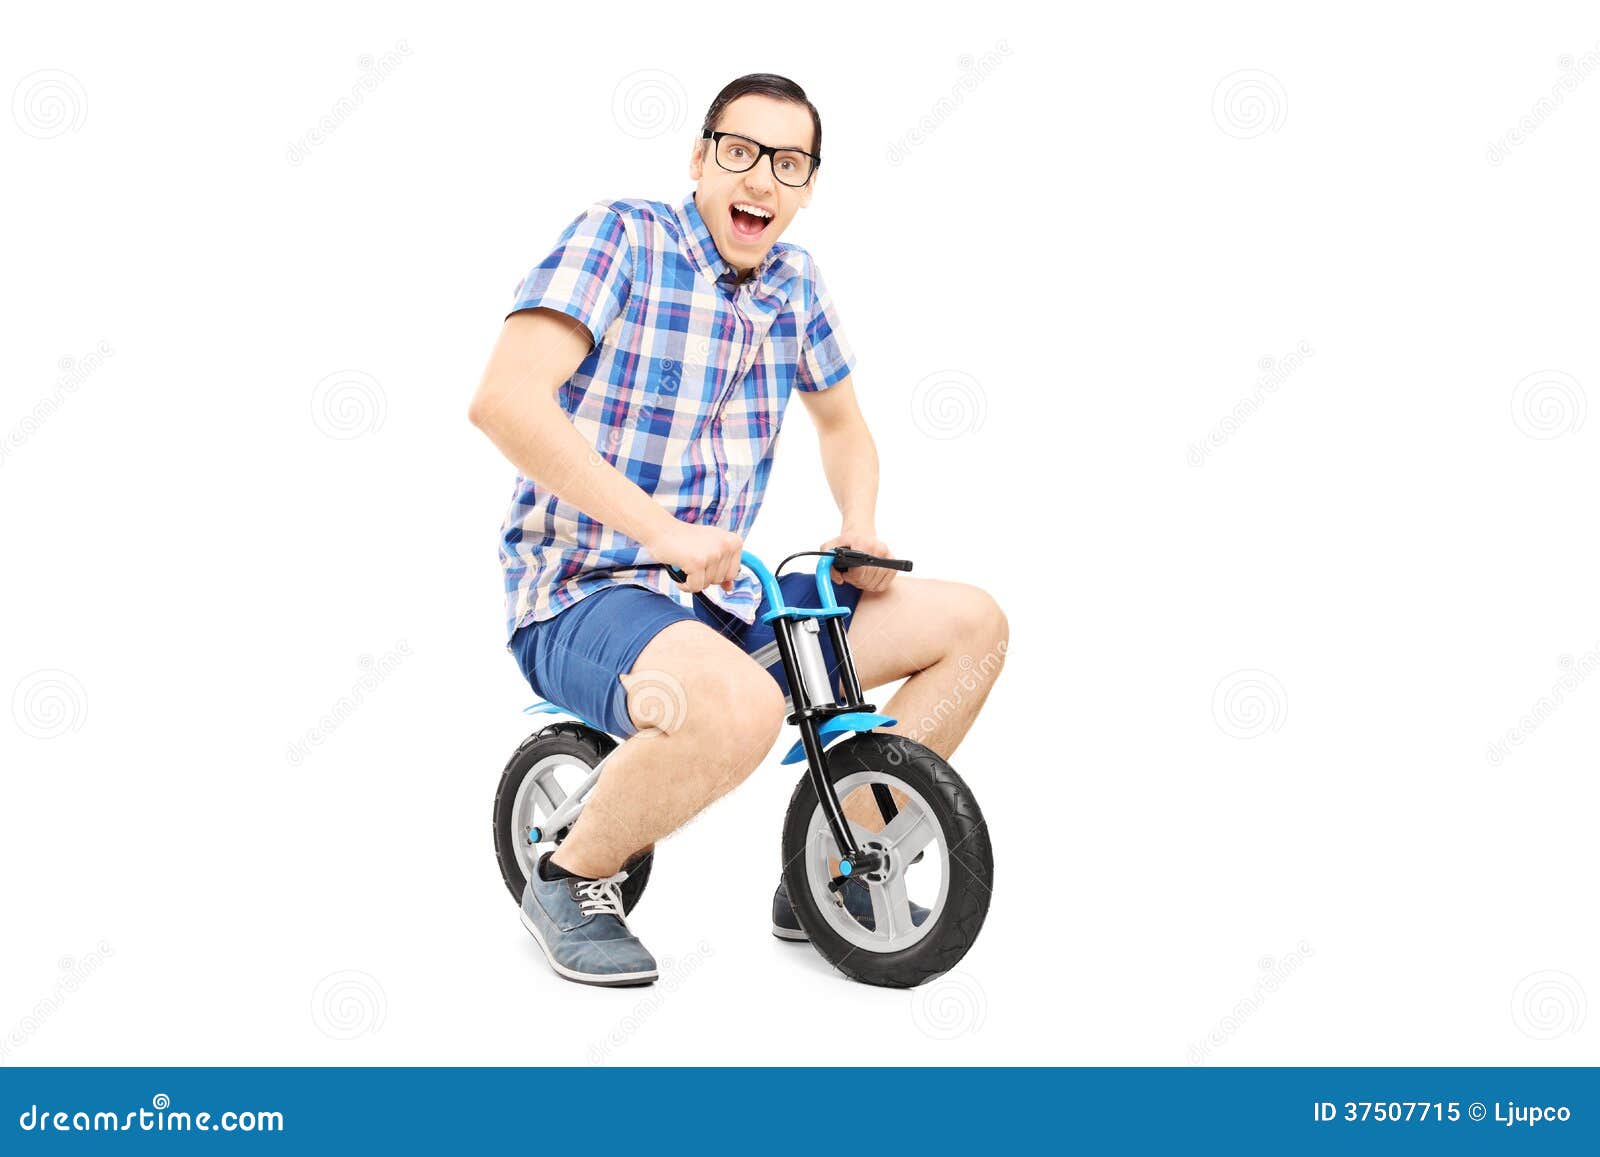 funny-young-man-riding-small-bike-isolated-white-background-37507715.jpg